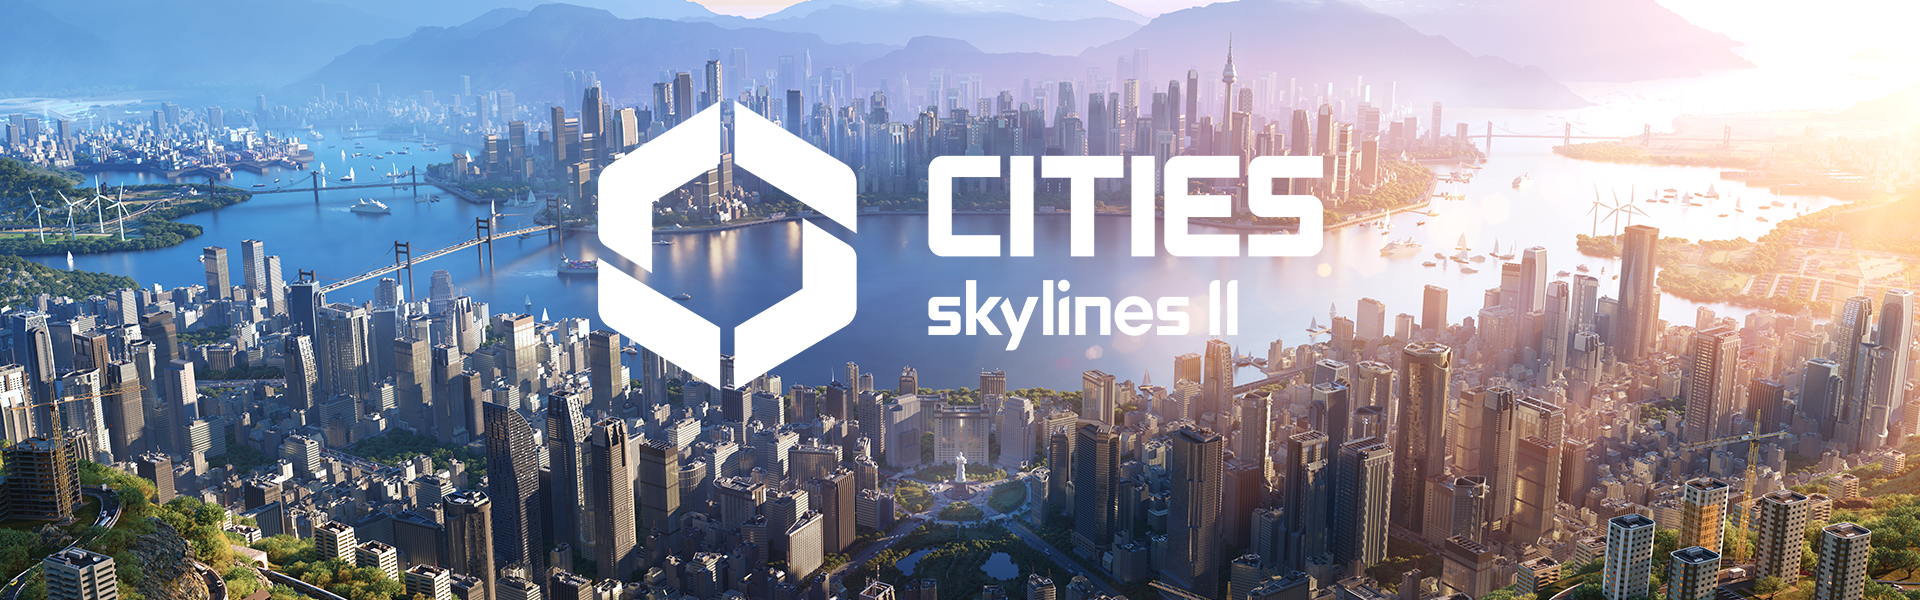 Cities: Skylines 2 Performance Has not achieved the